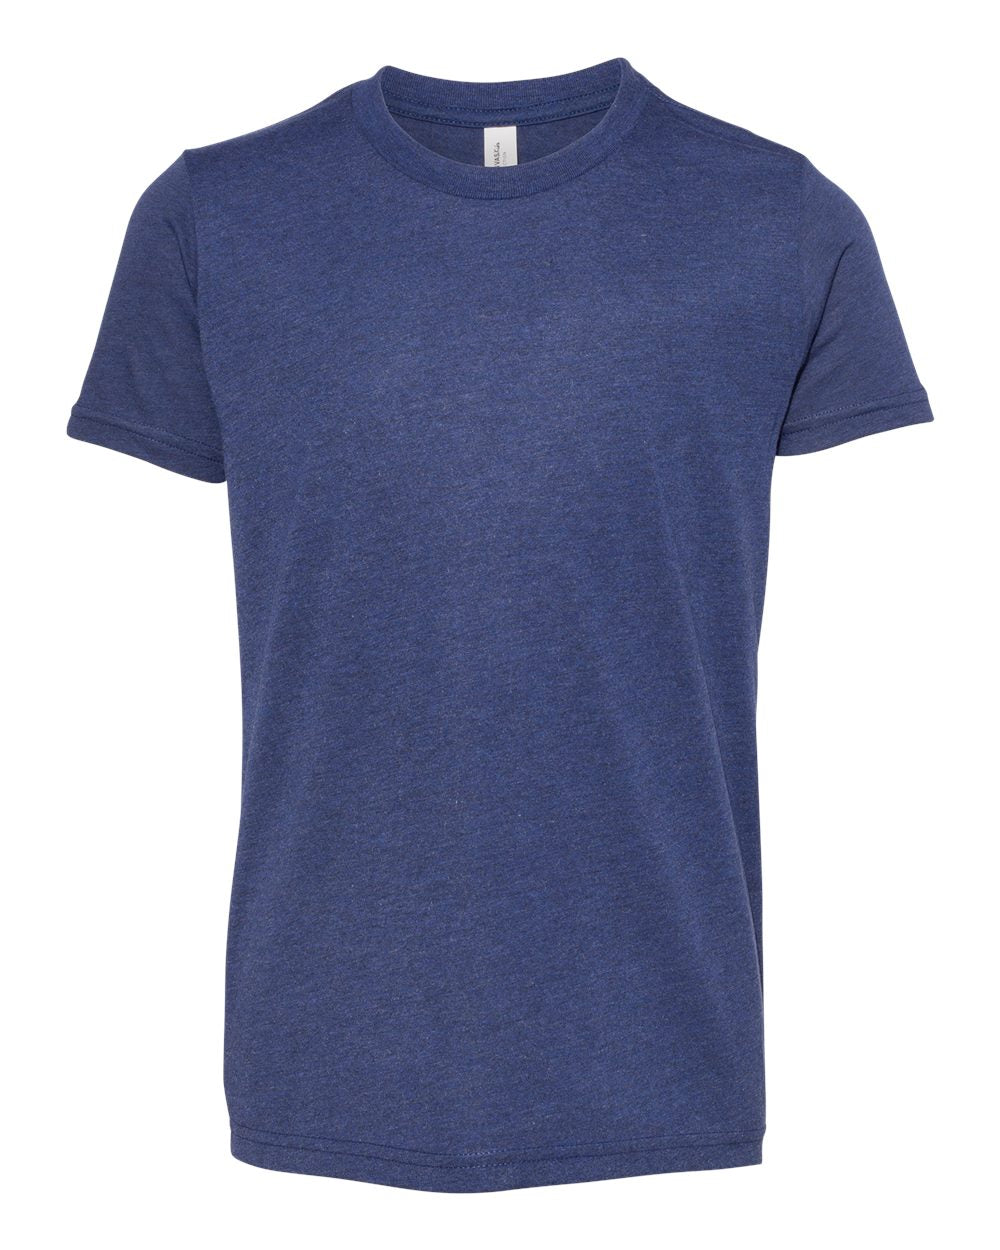 Bella + Canvas Youth Triblend Tee (3413y) in Navy Triblend